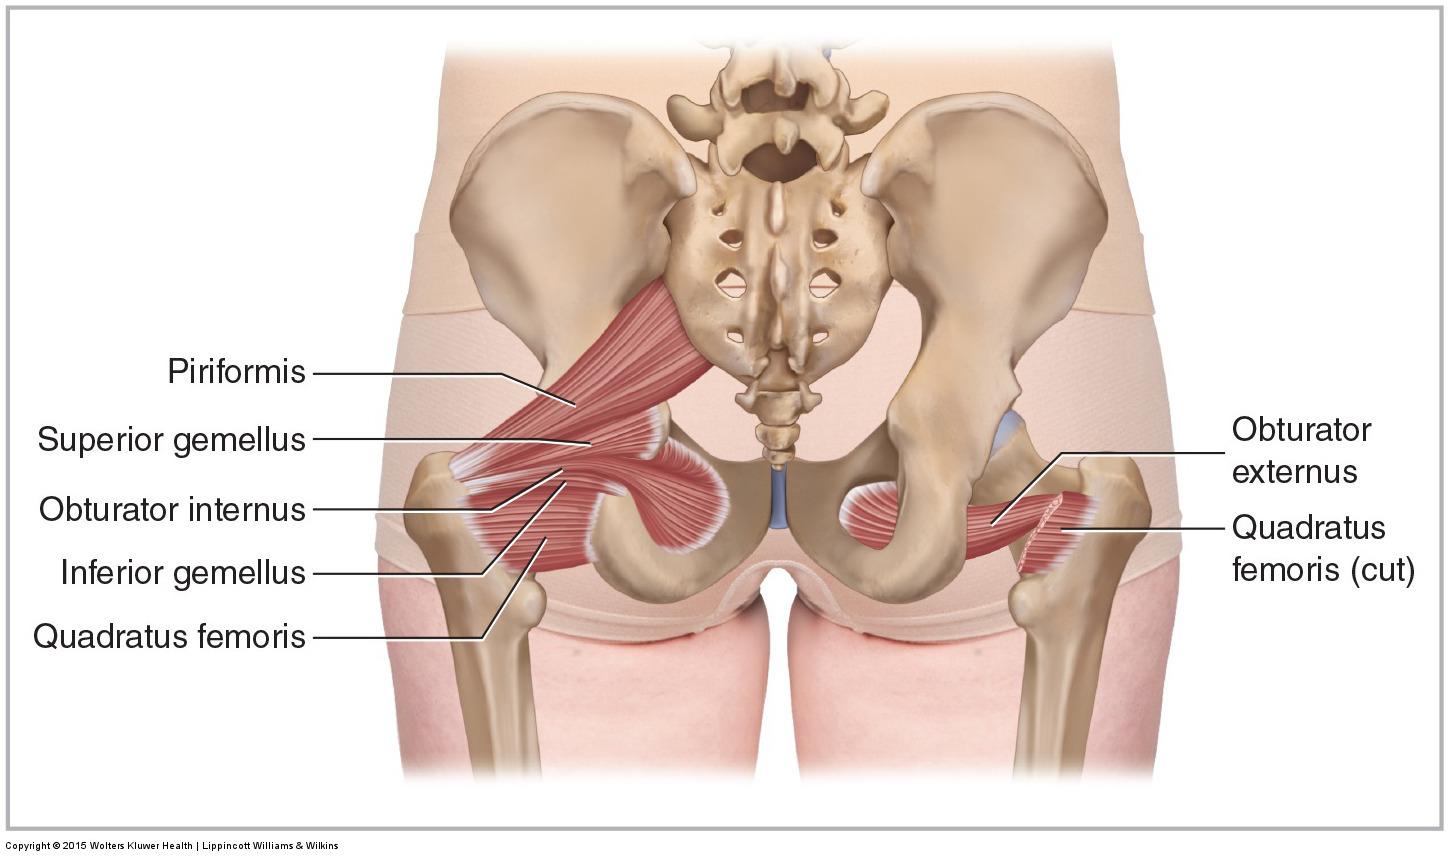 Muscles of the Pelvic Girdle & Lower Limbs: Structure, Movement